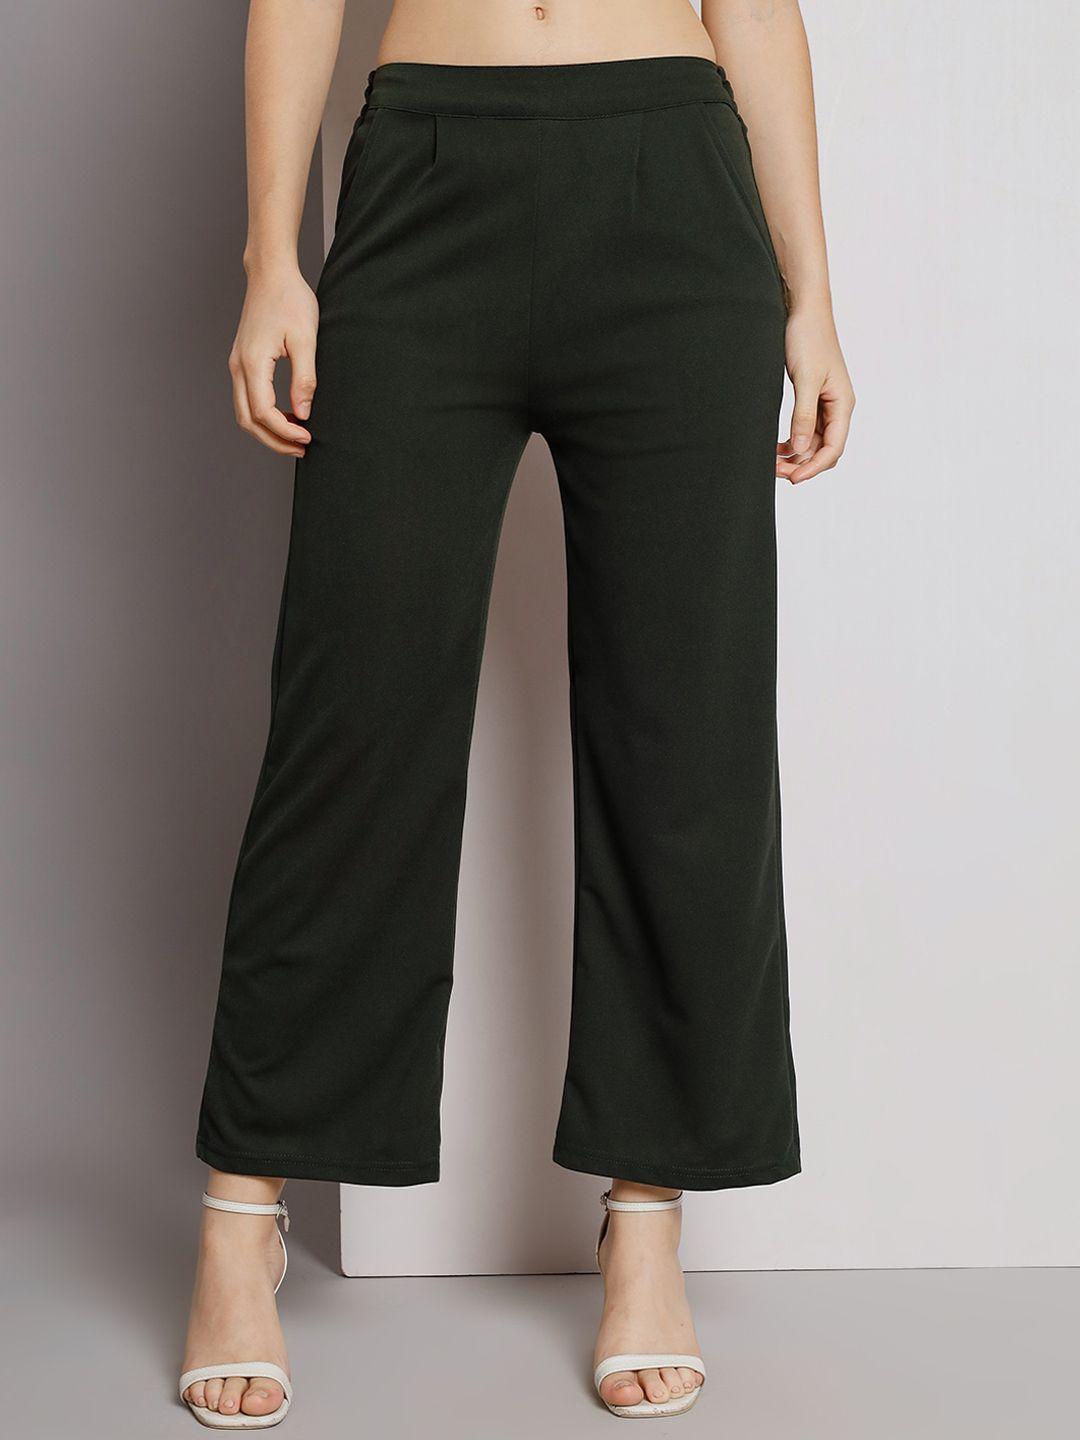 q-rious women olive green relaxed flared pleated trousers